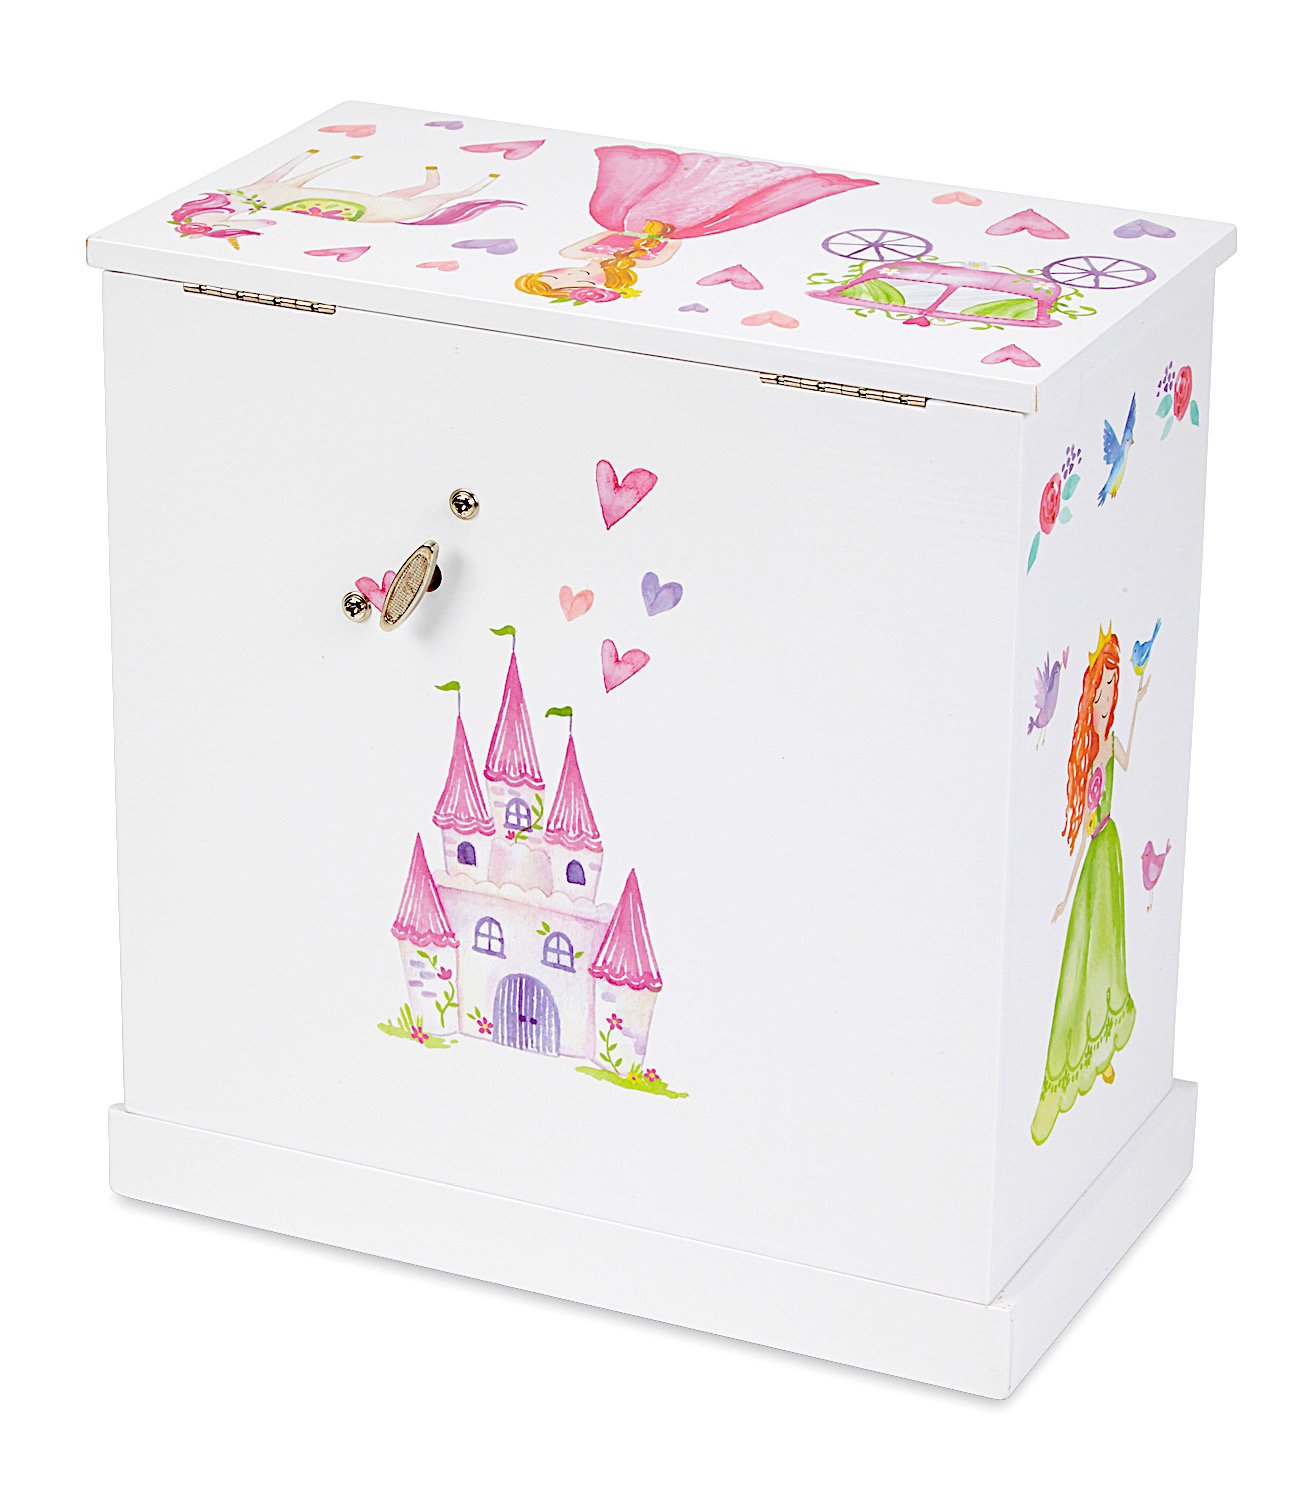 Unicorn Musical Jewelry Box with Pullout Drawers, Fairy Princess and Castle  Design, Dance of the Sugar Plum Fairy Tune